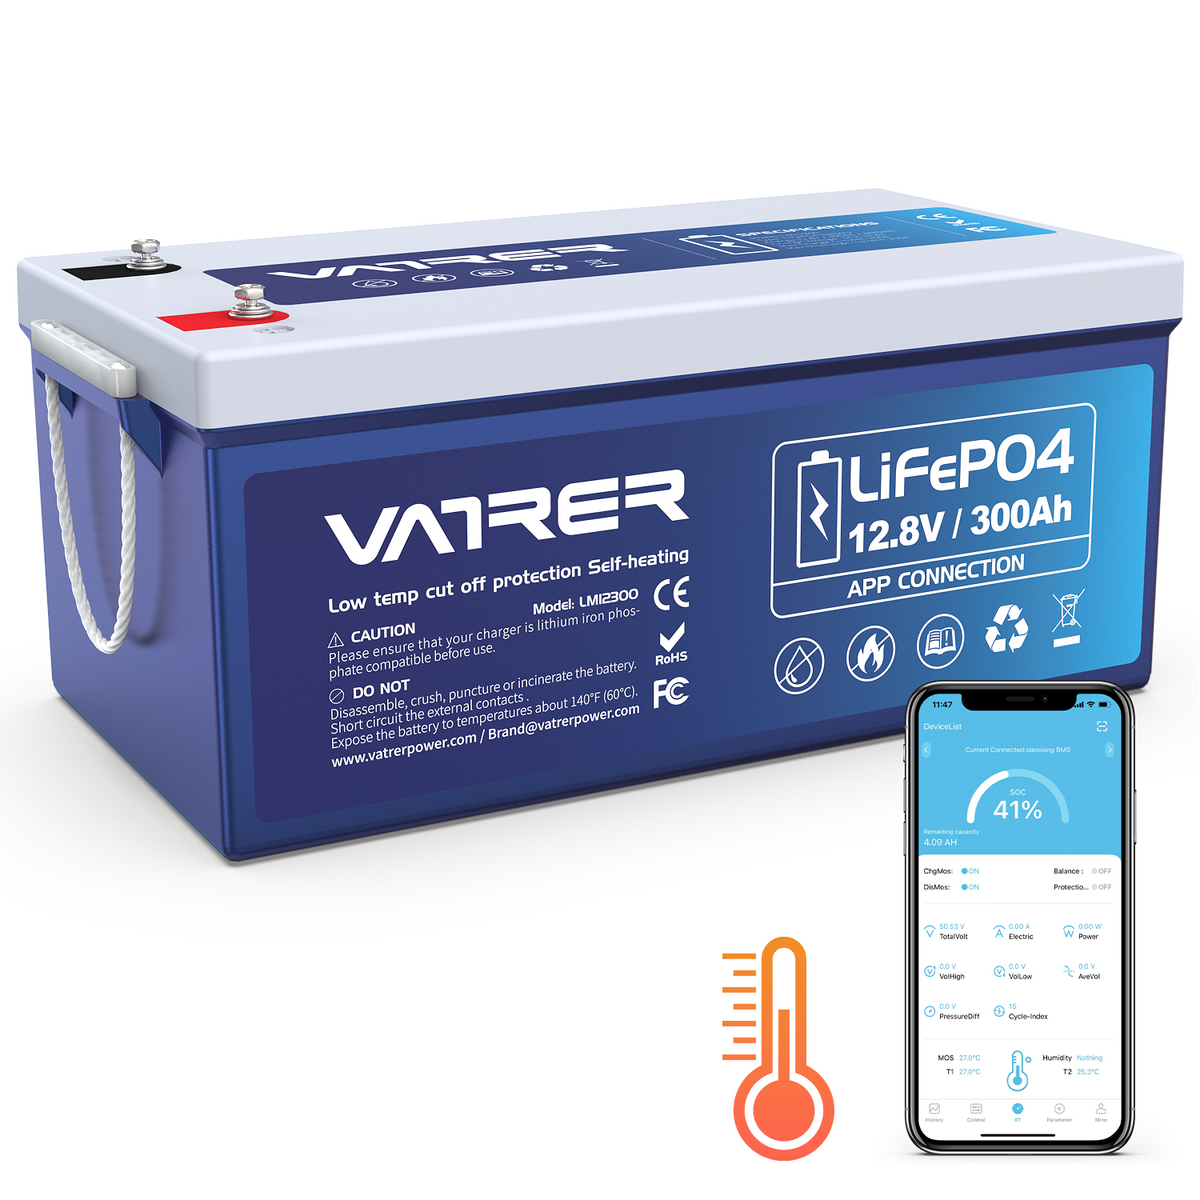 Vatrer 12V 300AH Bluetooth LiFePO4 Lithium Battery with Self-Heating JP 11